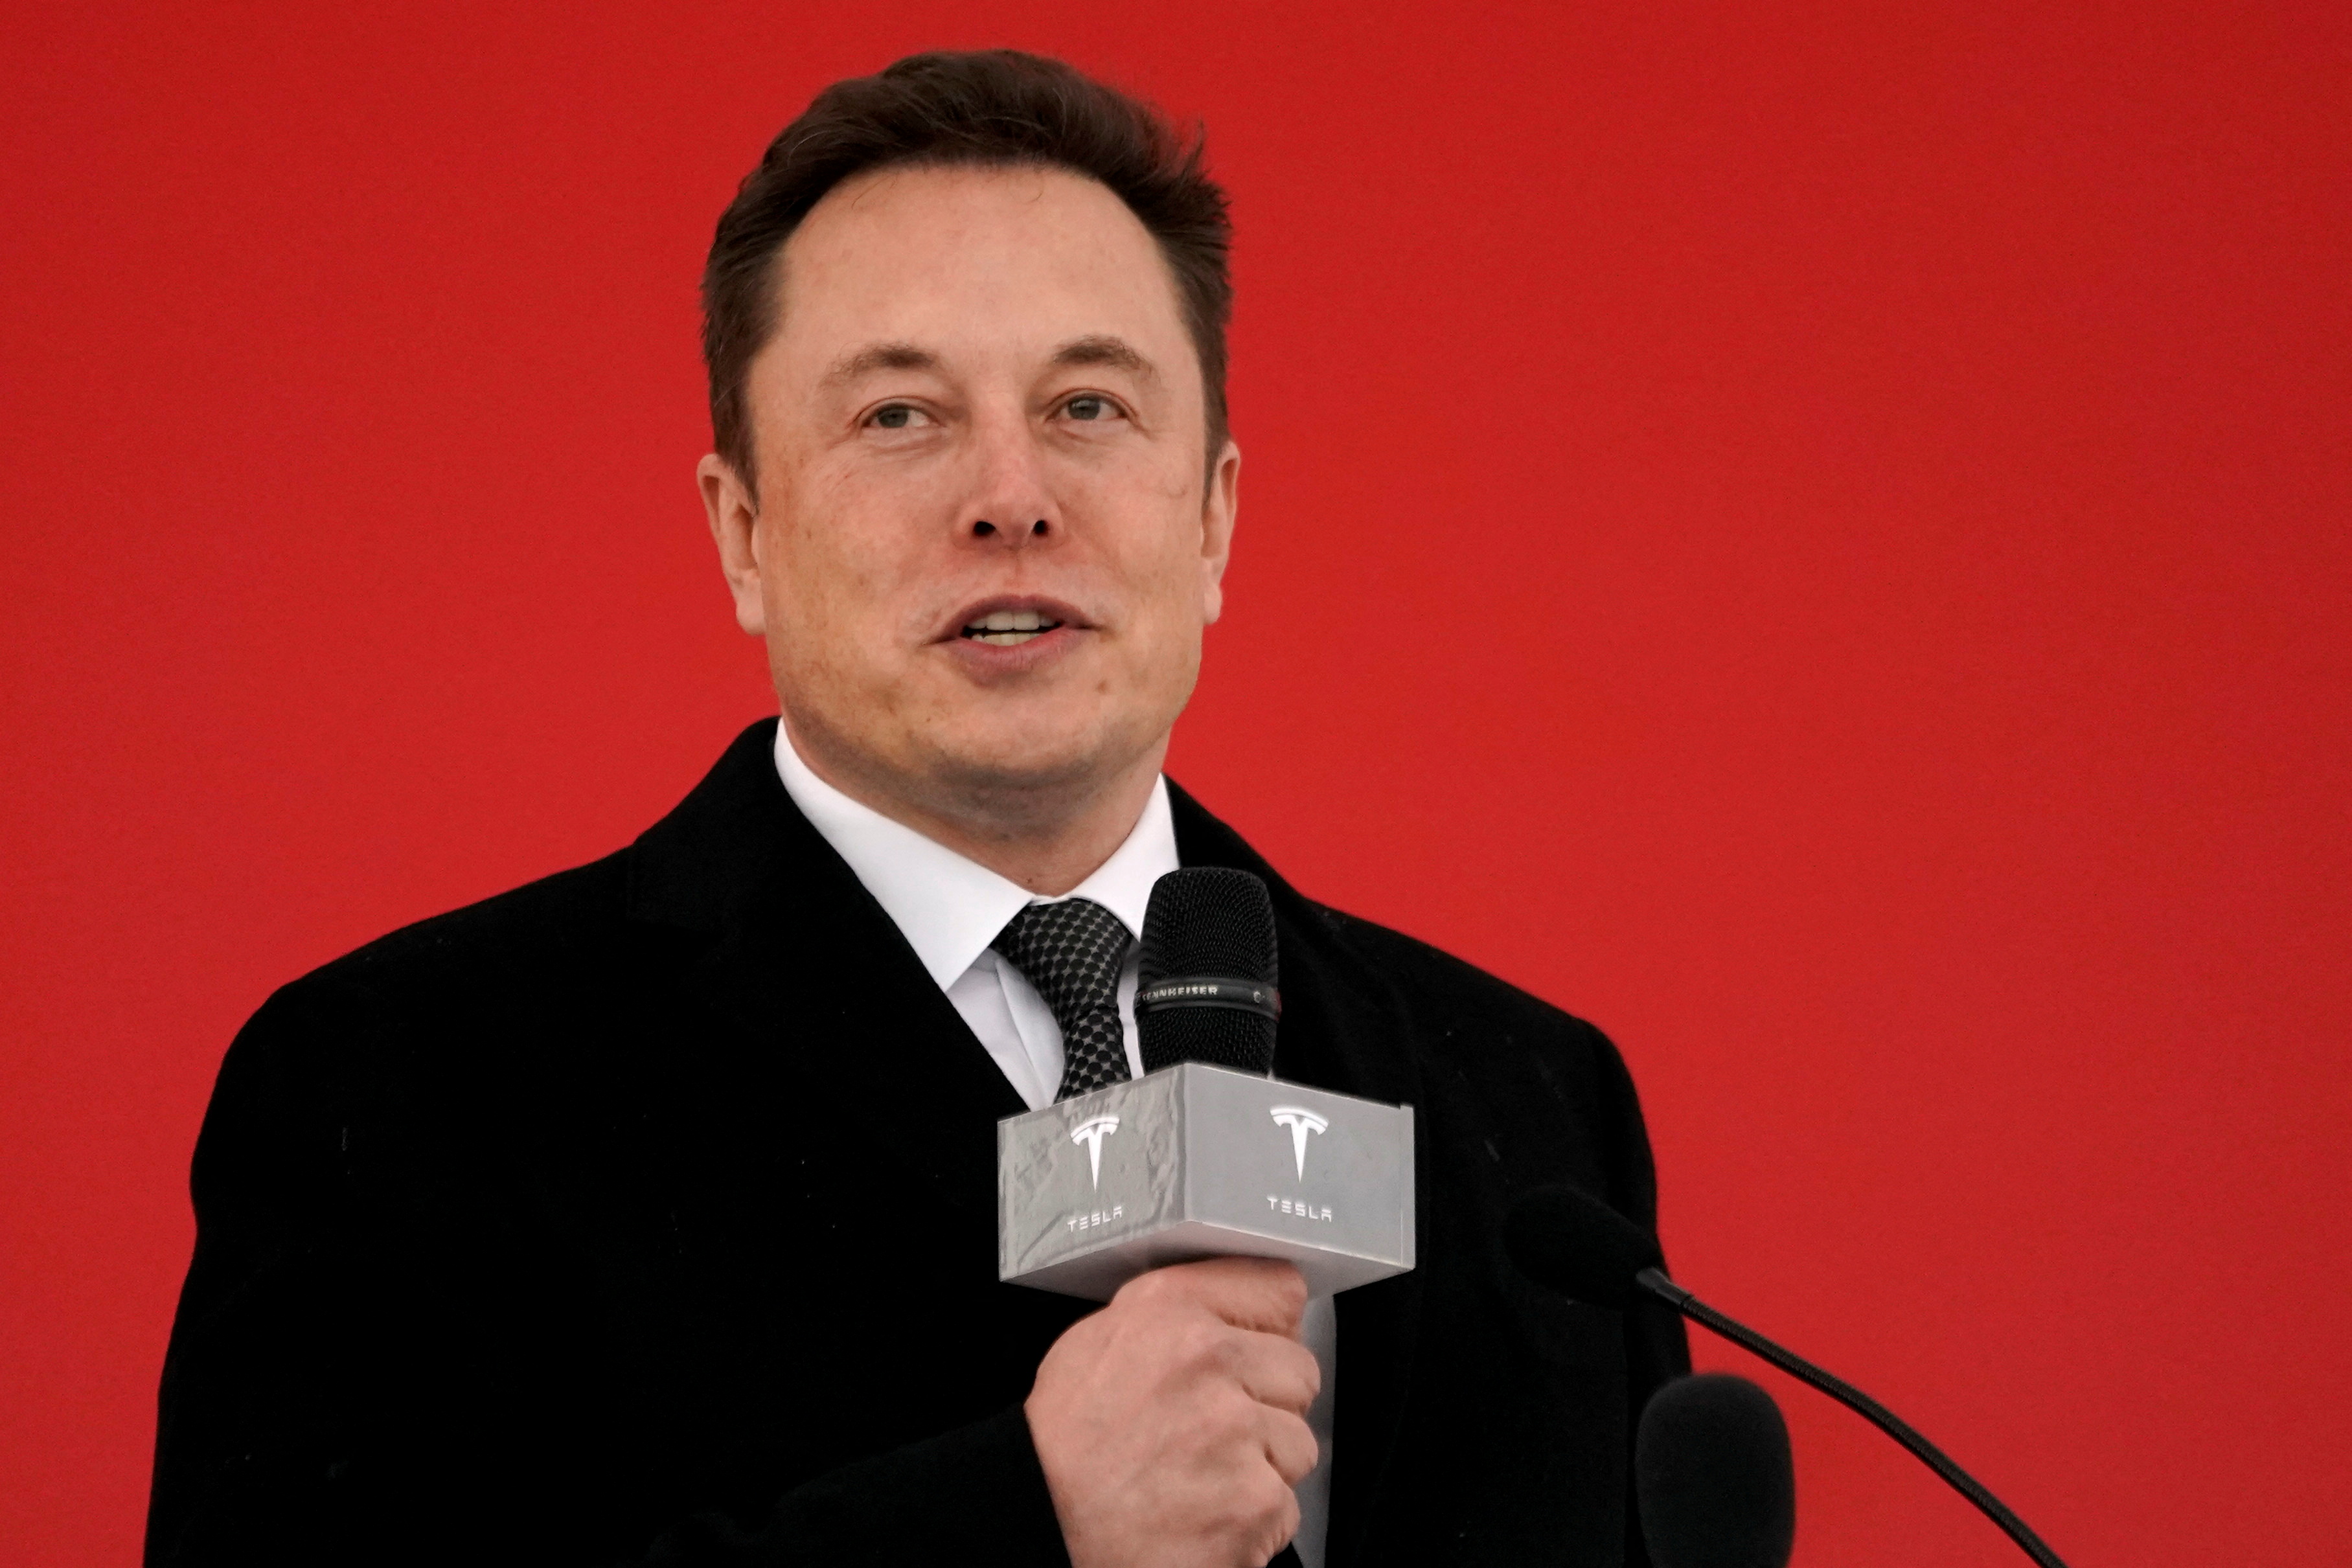 Elon Musk Tweets he is Leaning Toward Voting for Ron DeSantis in 2024 Presidential Election